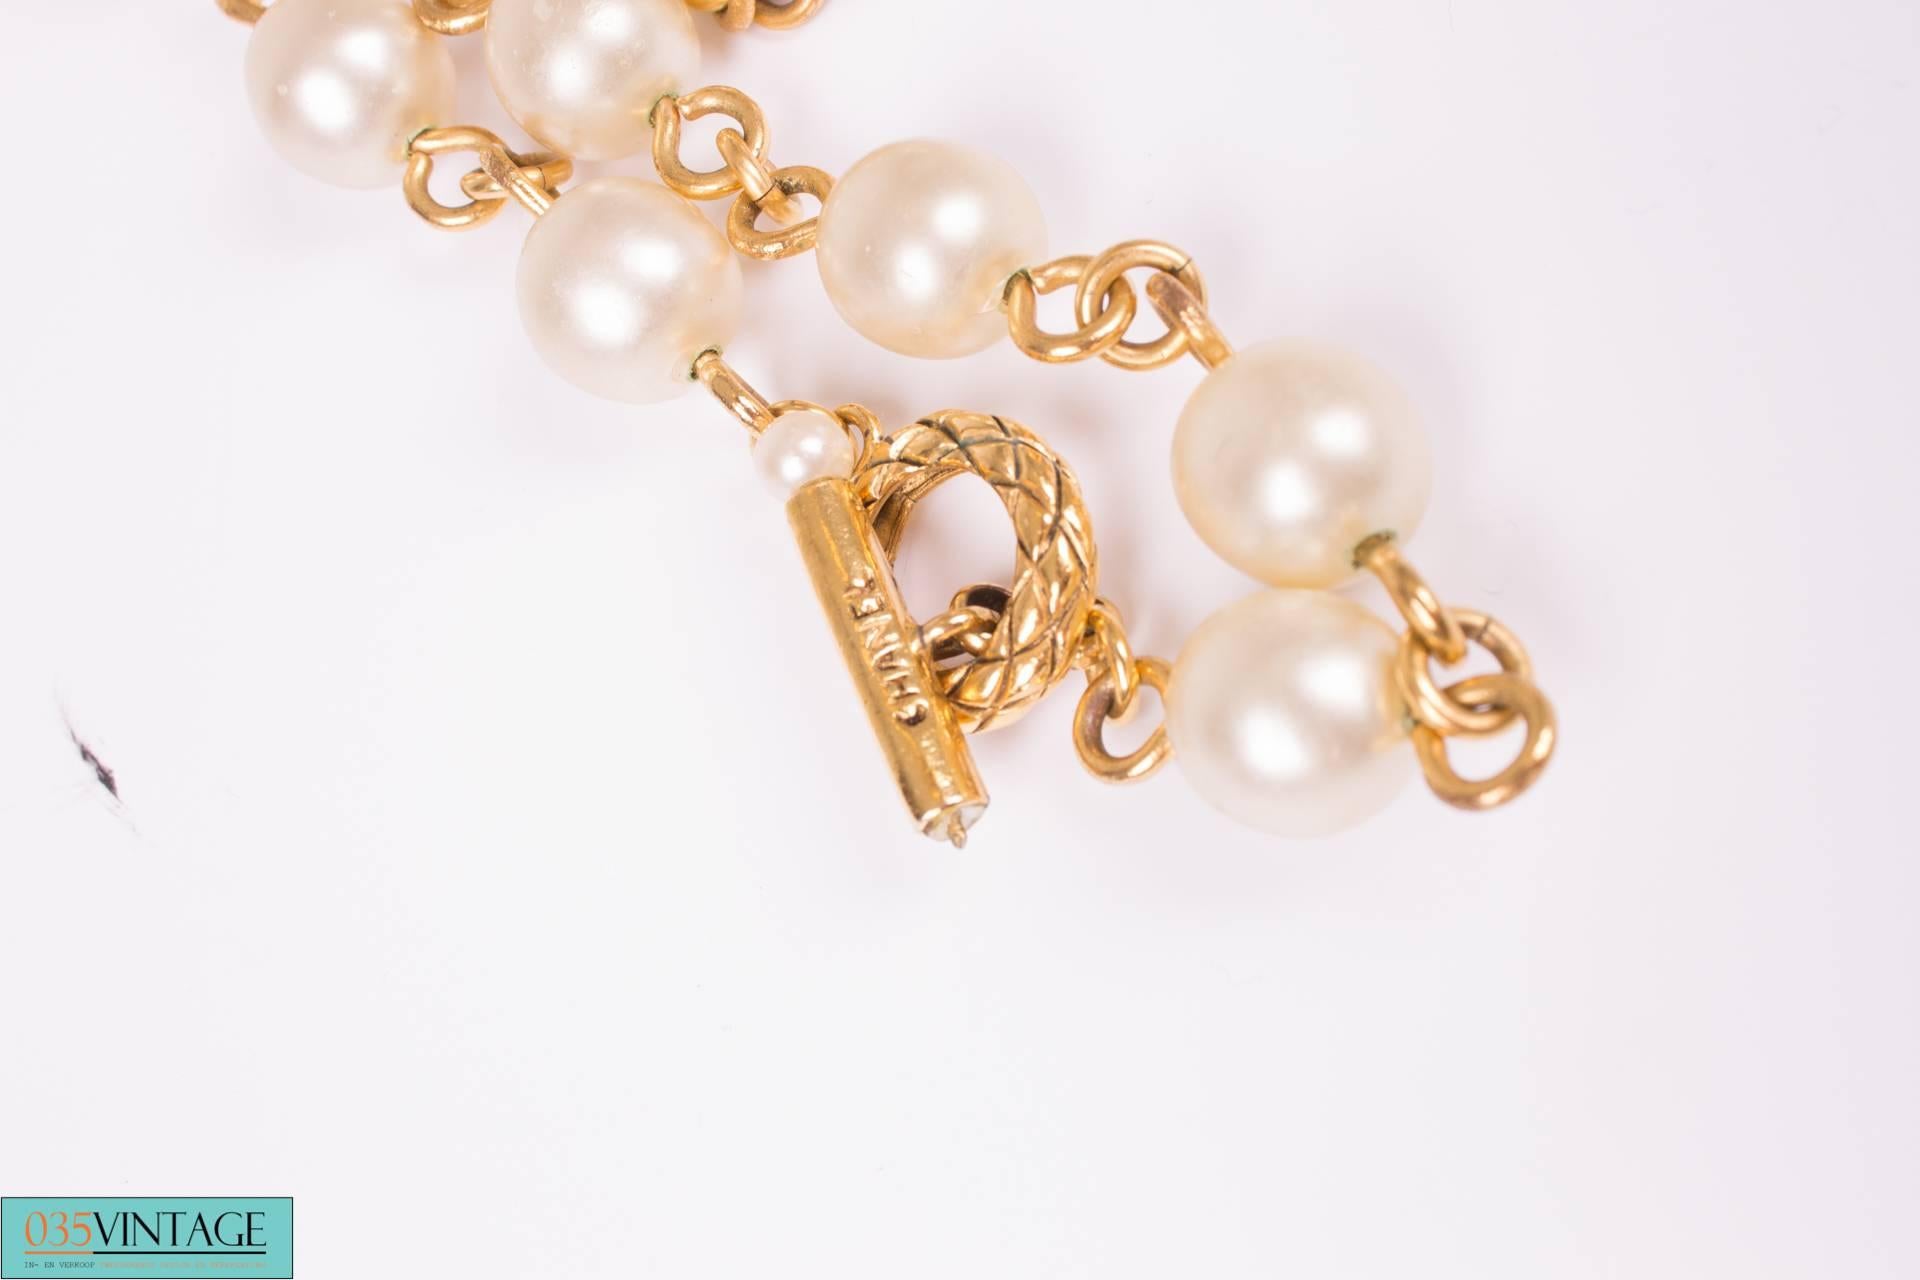 Straight from the 90's... Outstanding statement piece, a pearl necklace with a large golden charm by Chanel.

A real eyecatcher, the large faux pearls are connected with a golden chain and the charm measures as much as 10 x 6 centimeters.

This